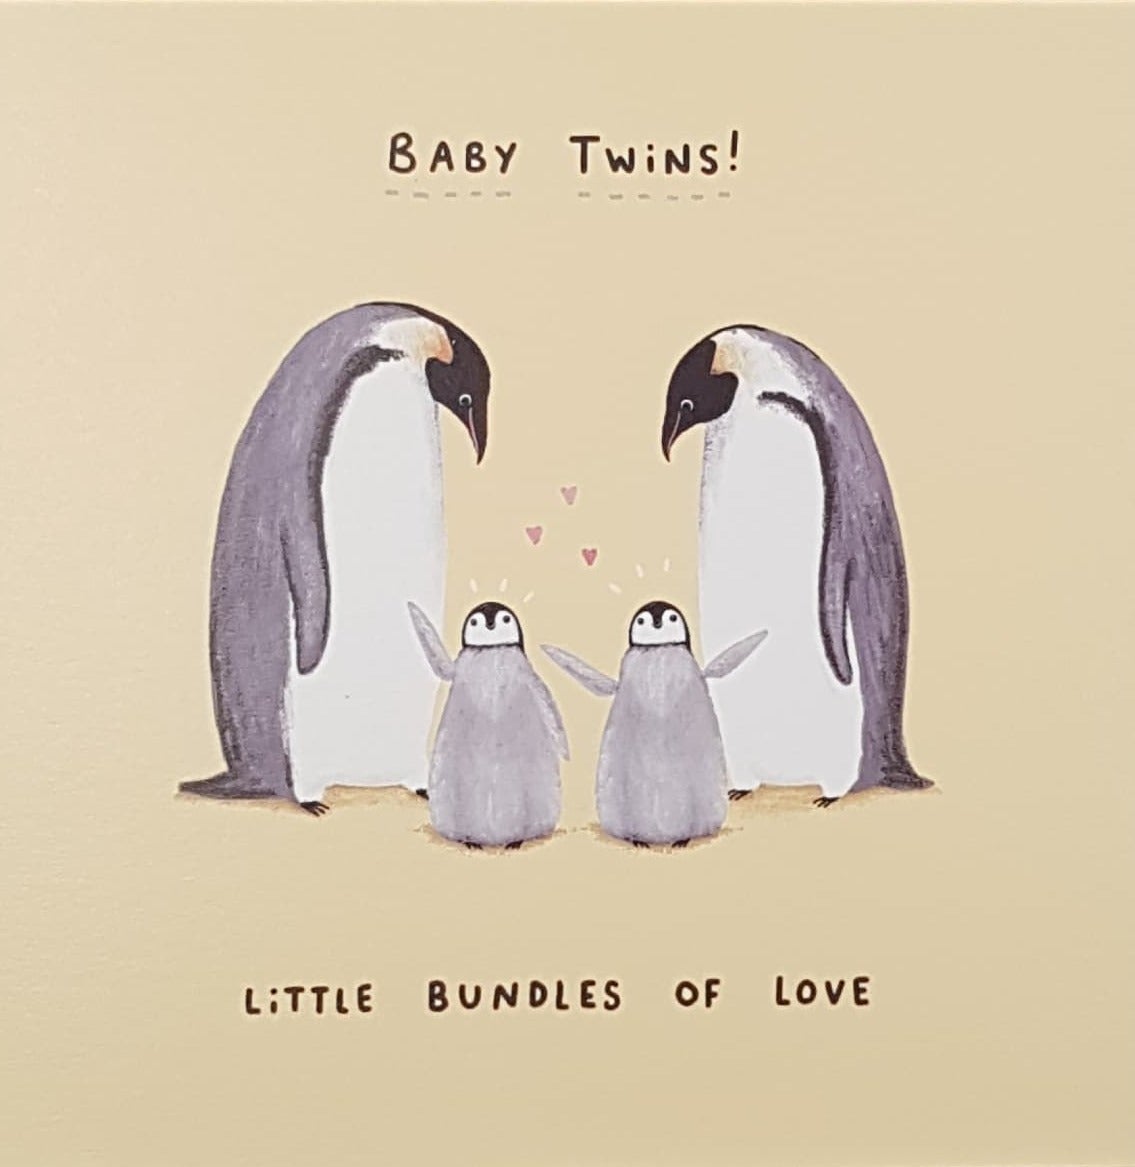 New Baby Card - Twins / 'Little Bundles Of Love'